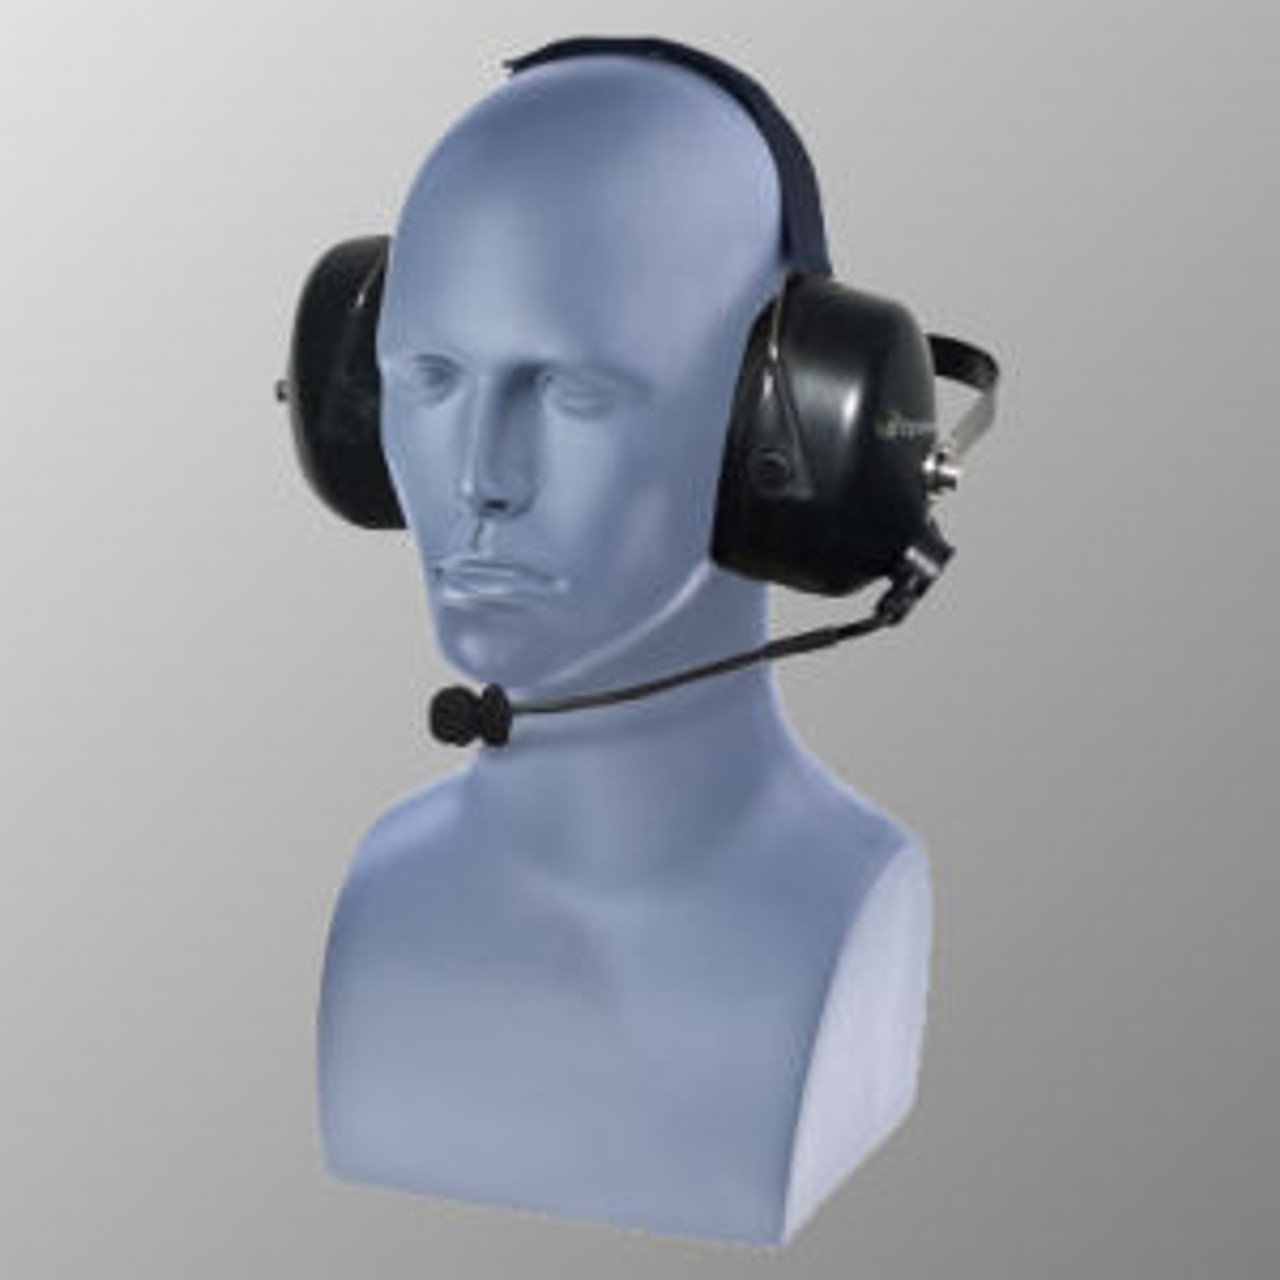 EF Johnson 5000 Noise Canceling Double Muff Behind The Head Headset